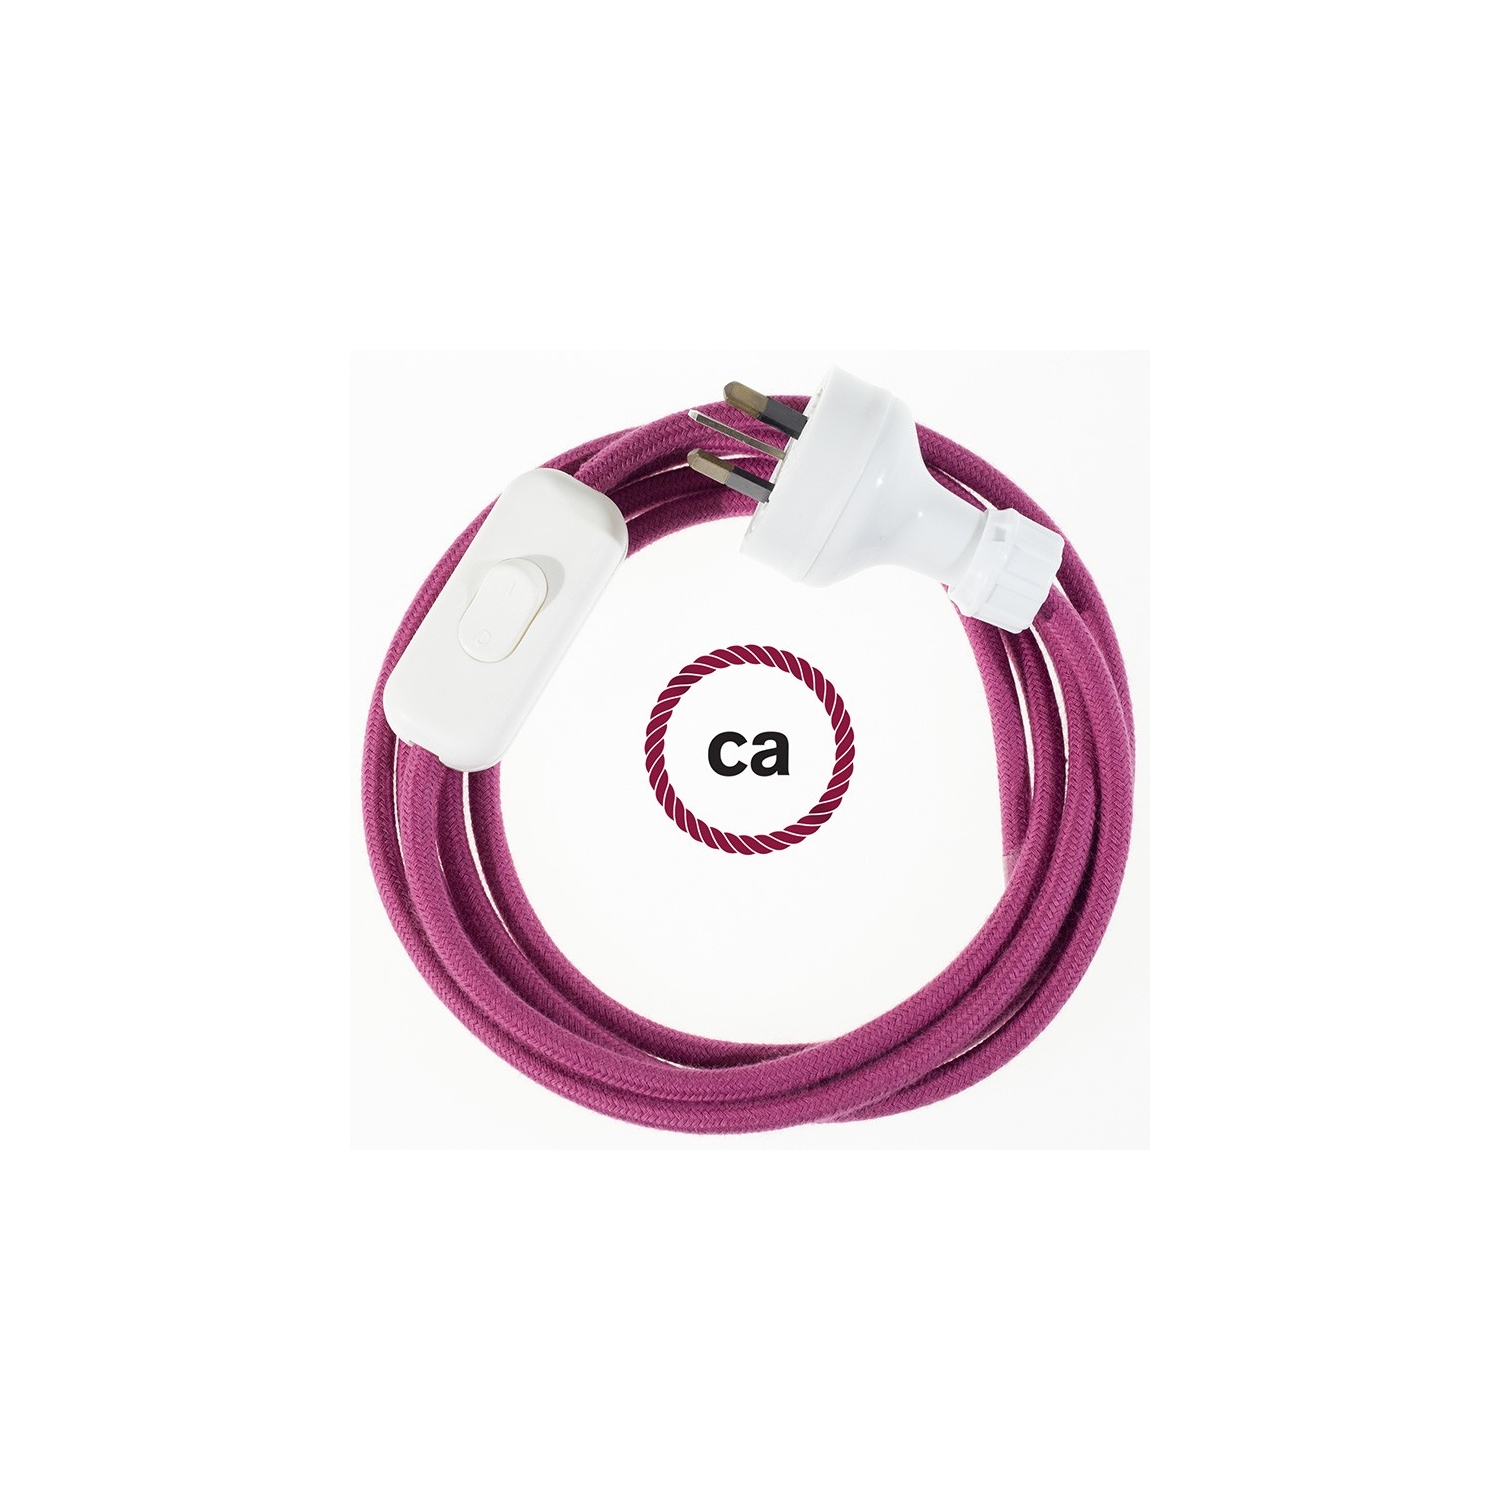 Wiring Burgundy Cotton textile cable RC32 - 1.80 mt